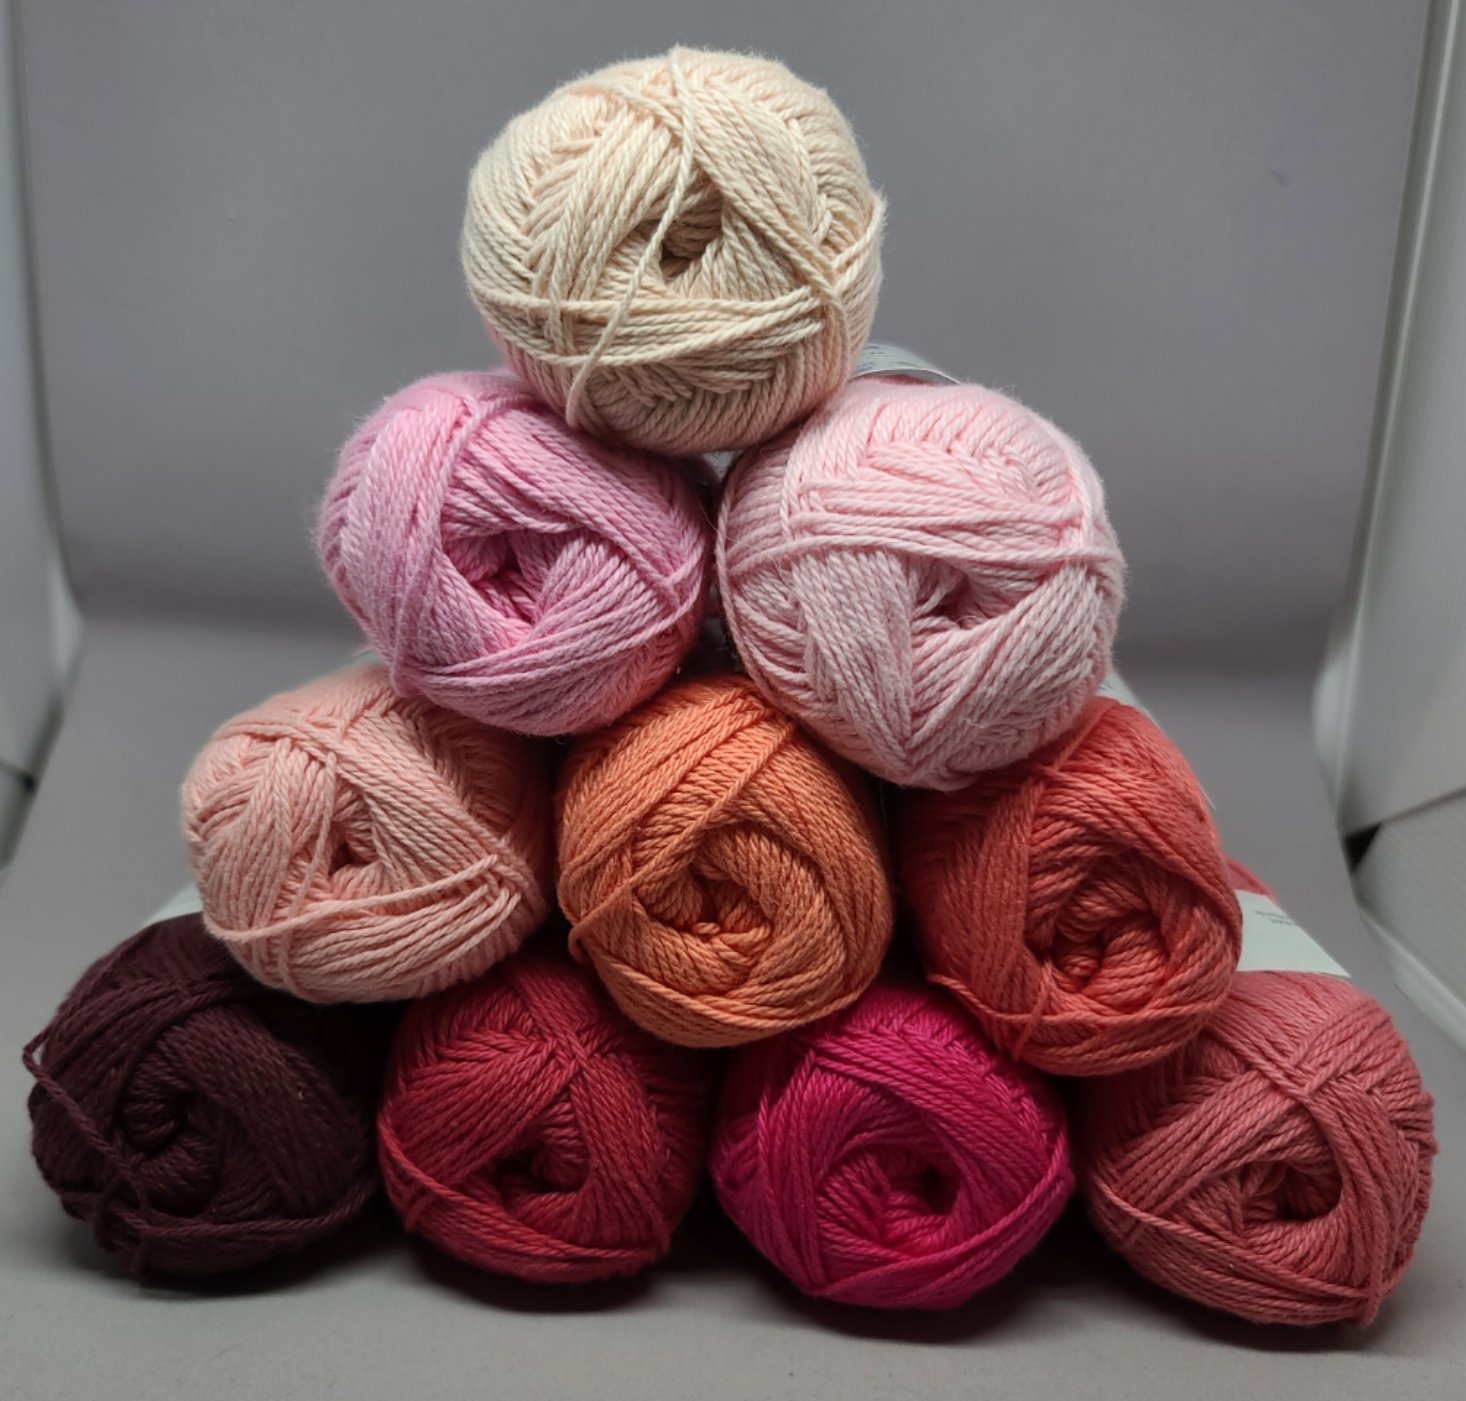 Temperature Blanket Kits — A Twisted Picot